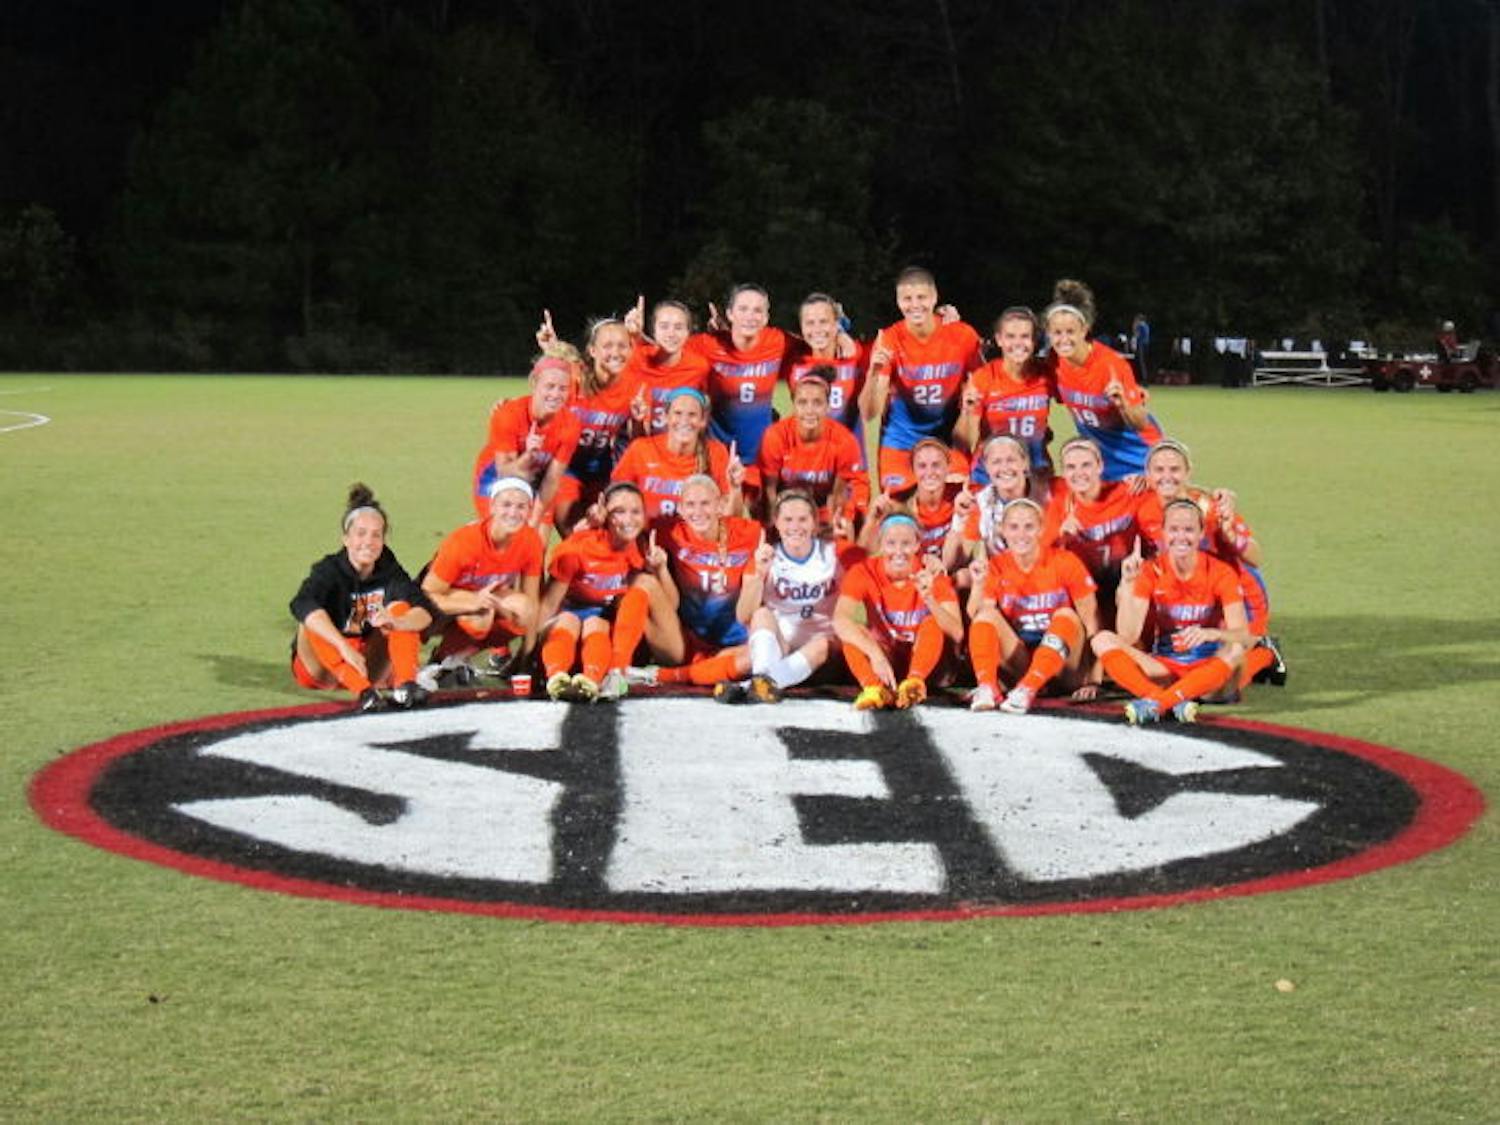 The Florida soccer team celebrates after winning a share of the Southeastern Conference with its 5-1 win against Georgia on Thursday night in Athens, Ga.